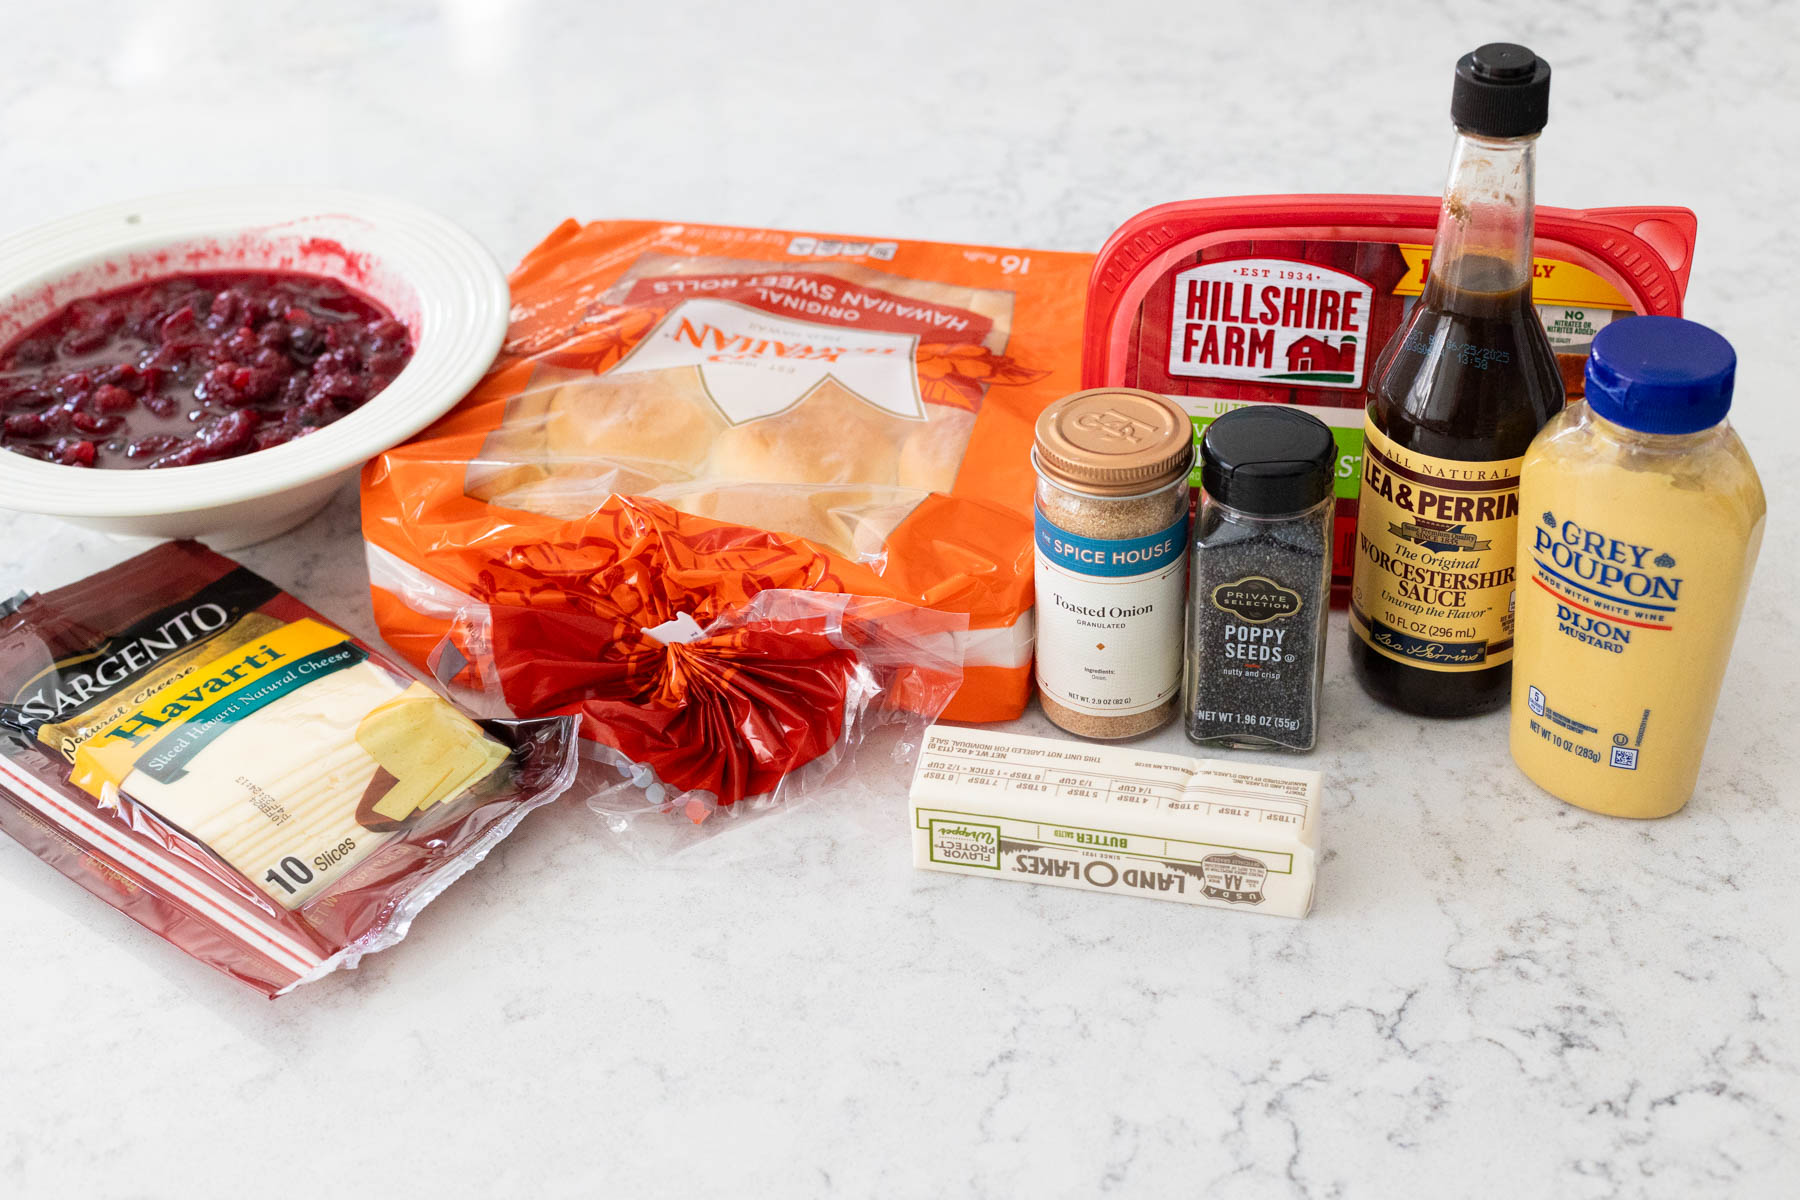 The Hawaiian rolls and other ingredients to make cranberry turkey sliders are on the counter.